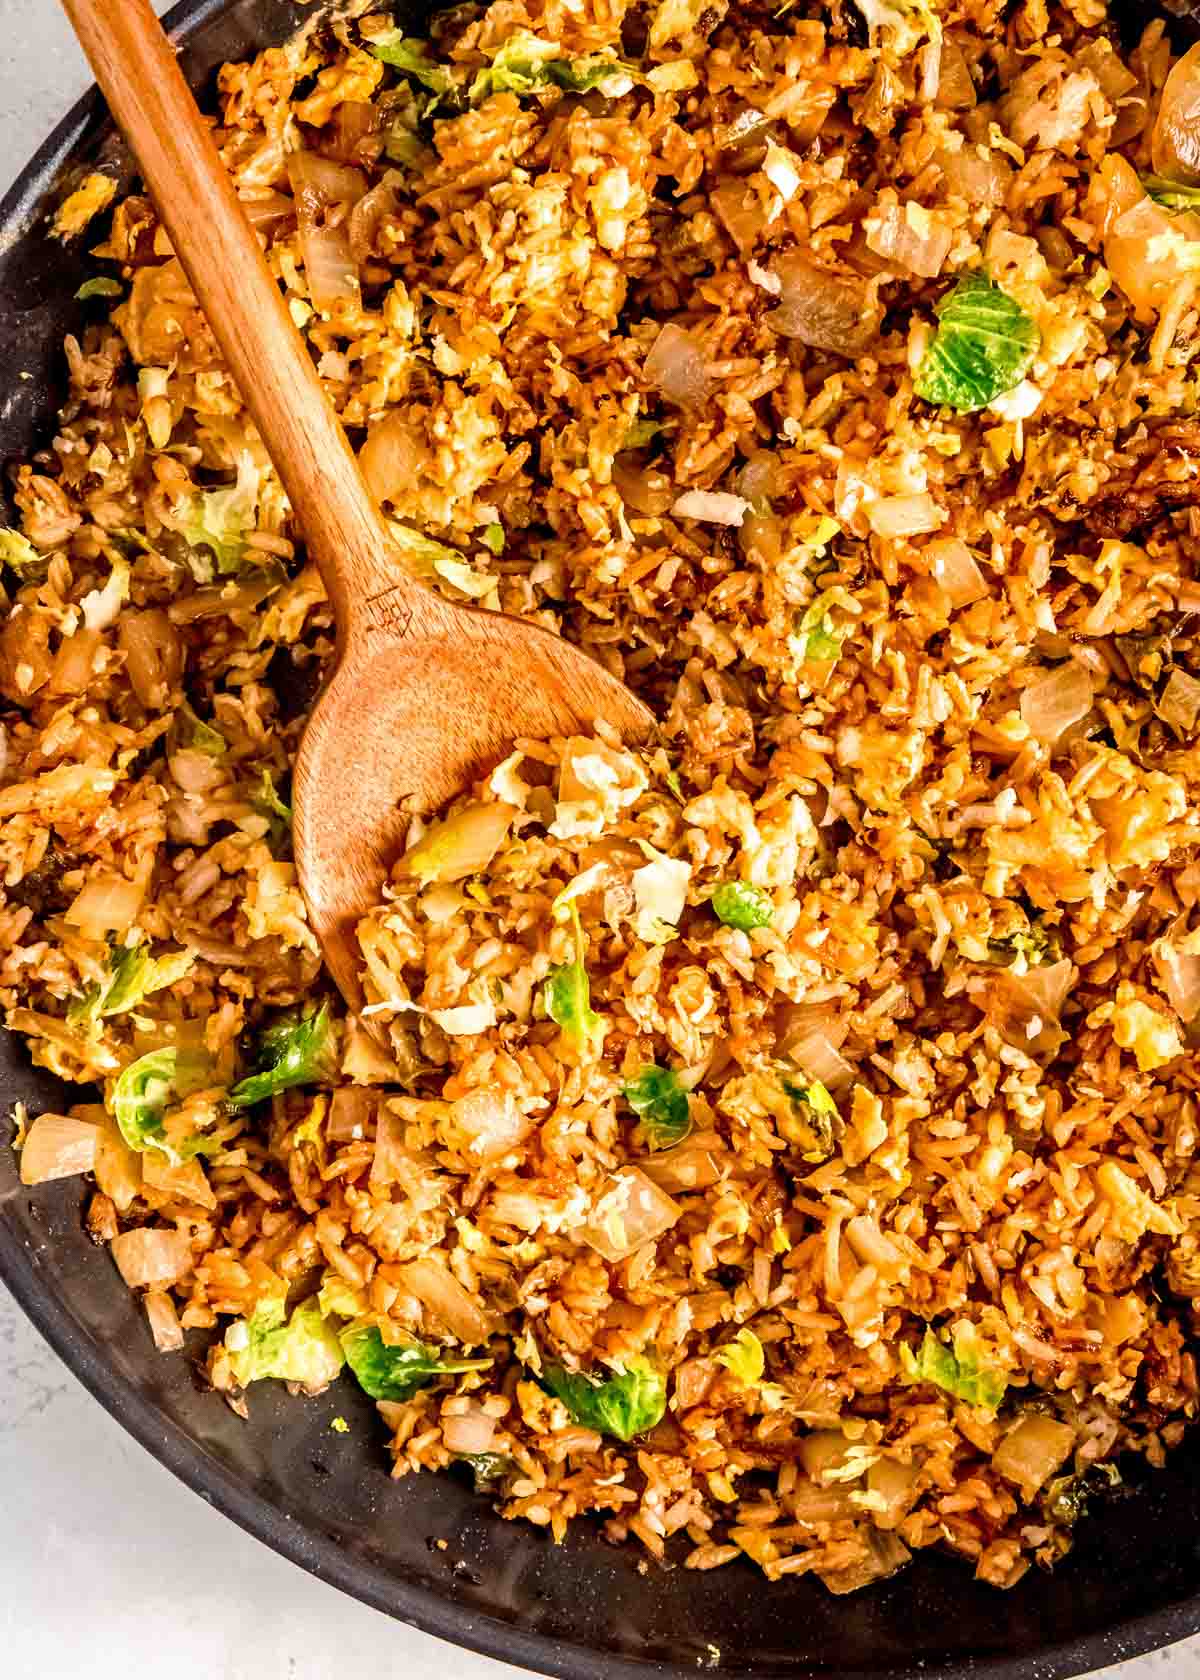 a large wooden spoon scooping up brussels sprout fried rice for a vegetarian side dish